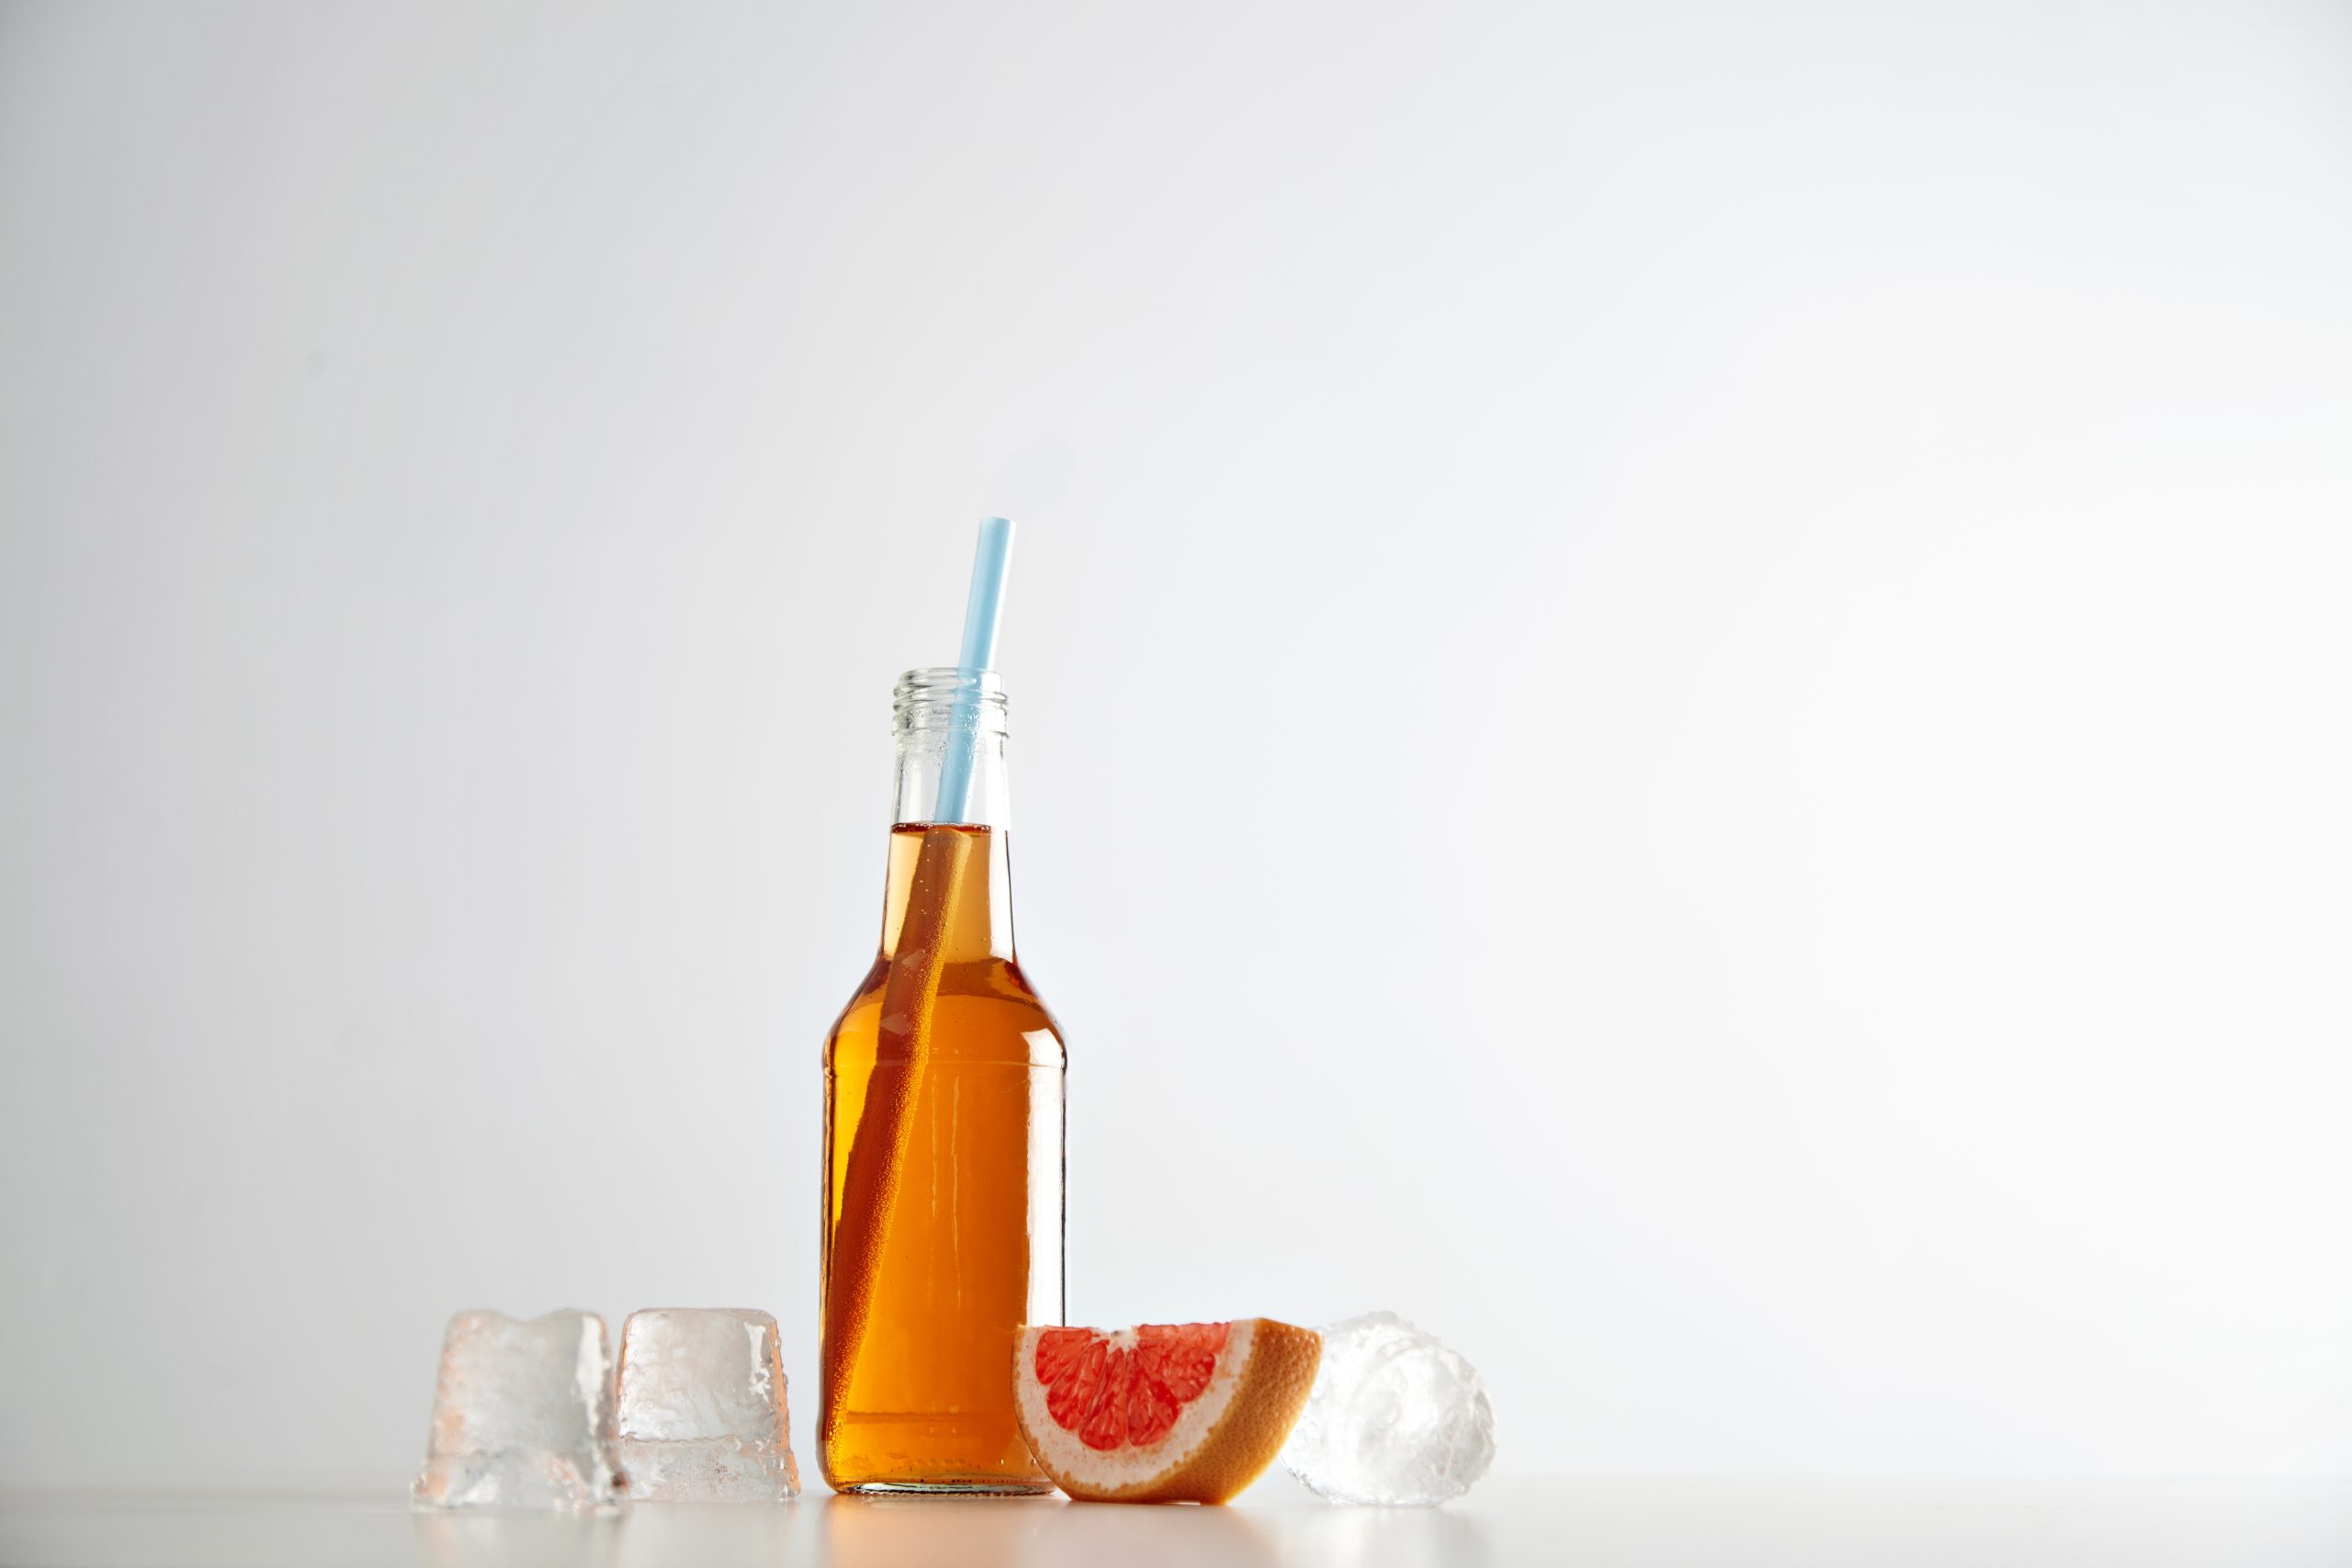 Tasty fresh cider in transparent bottle with blue drinking straw near ice cubes and red grapefruit slice isolated on white